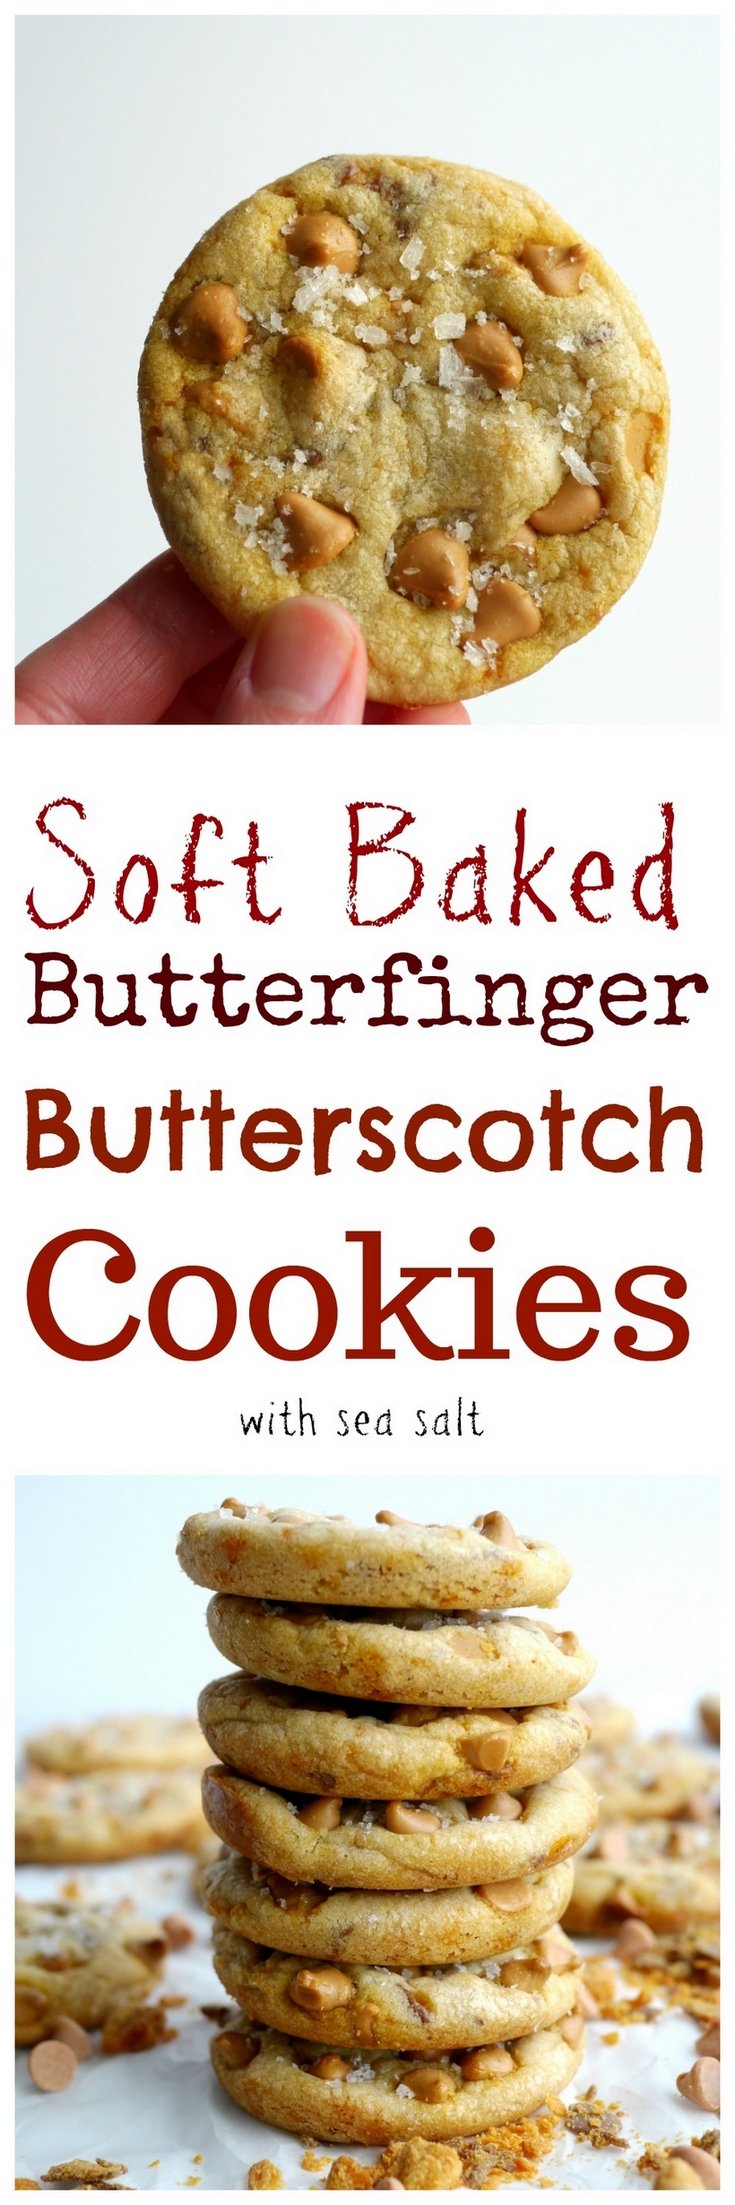 These Soft Baked Butterscotch-Butterfinger Cookies are all you need to satisfy your sweet tooth! The mixture of butterscotch chips with their brown sugar goodness and the crunchy texture of Butterfinger baking bits is going to rock your cookie jar, from NoblePig.com. via @cmpollak1